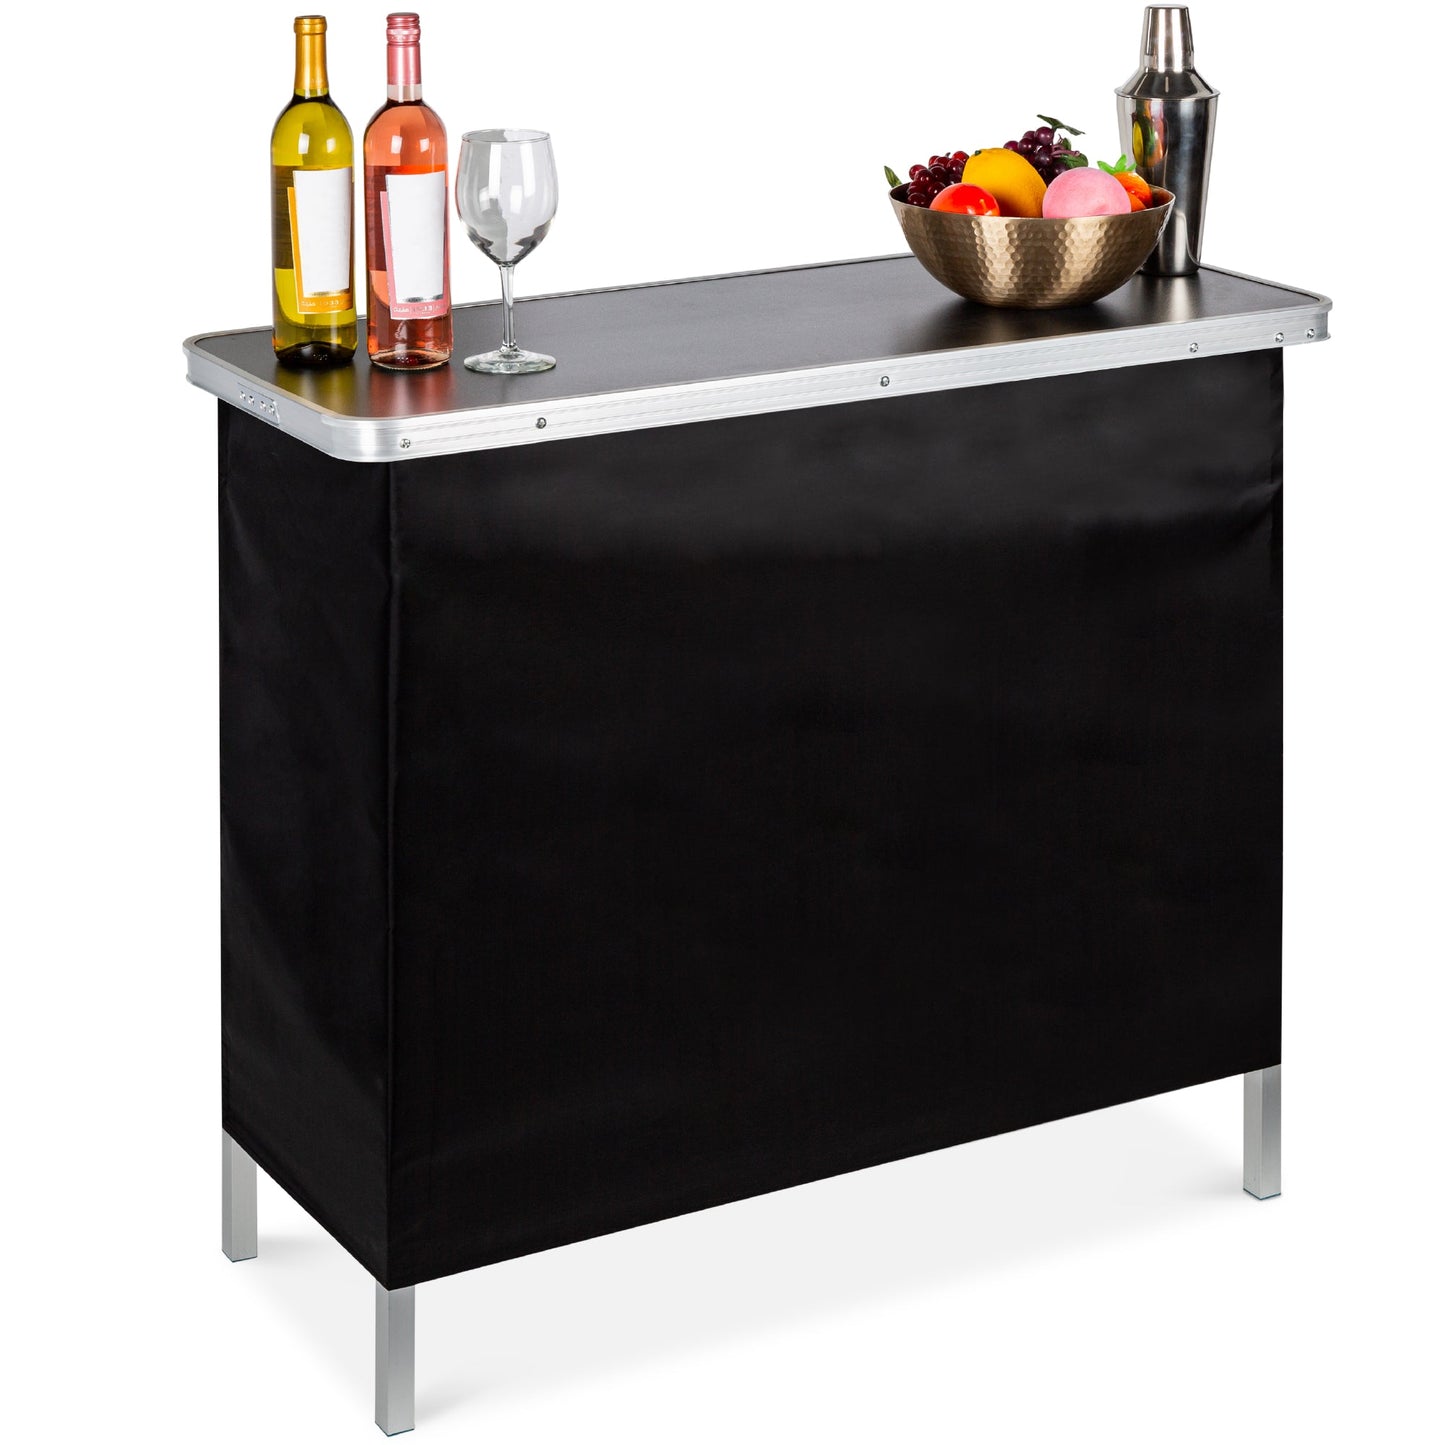 Portable Pop-Up Bar Table w/ Carrying Case, Removable Skirt